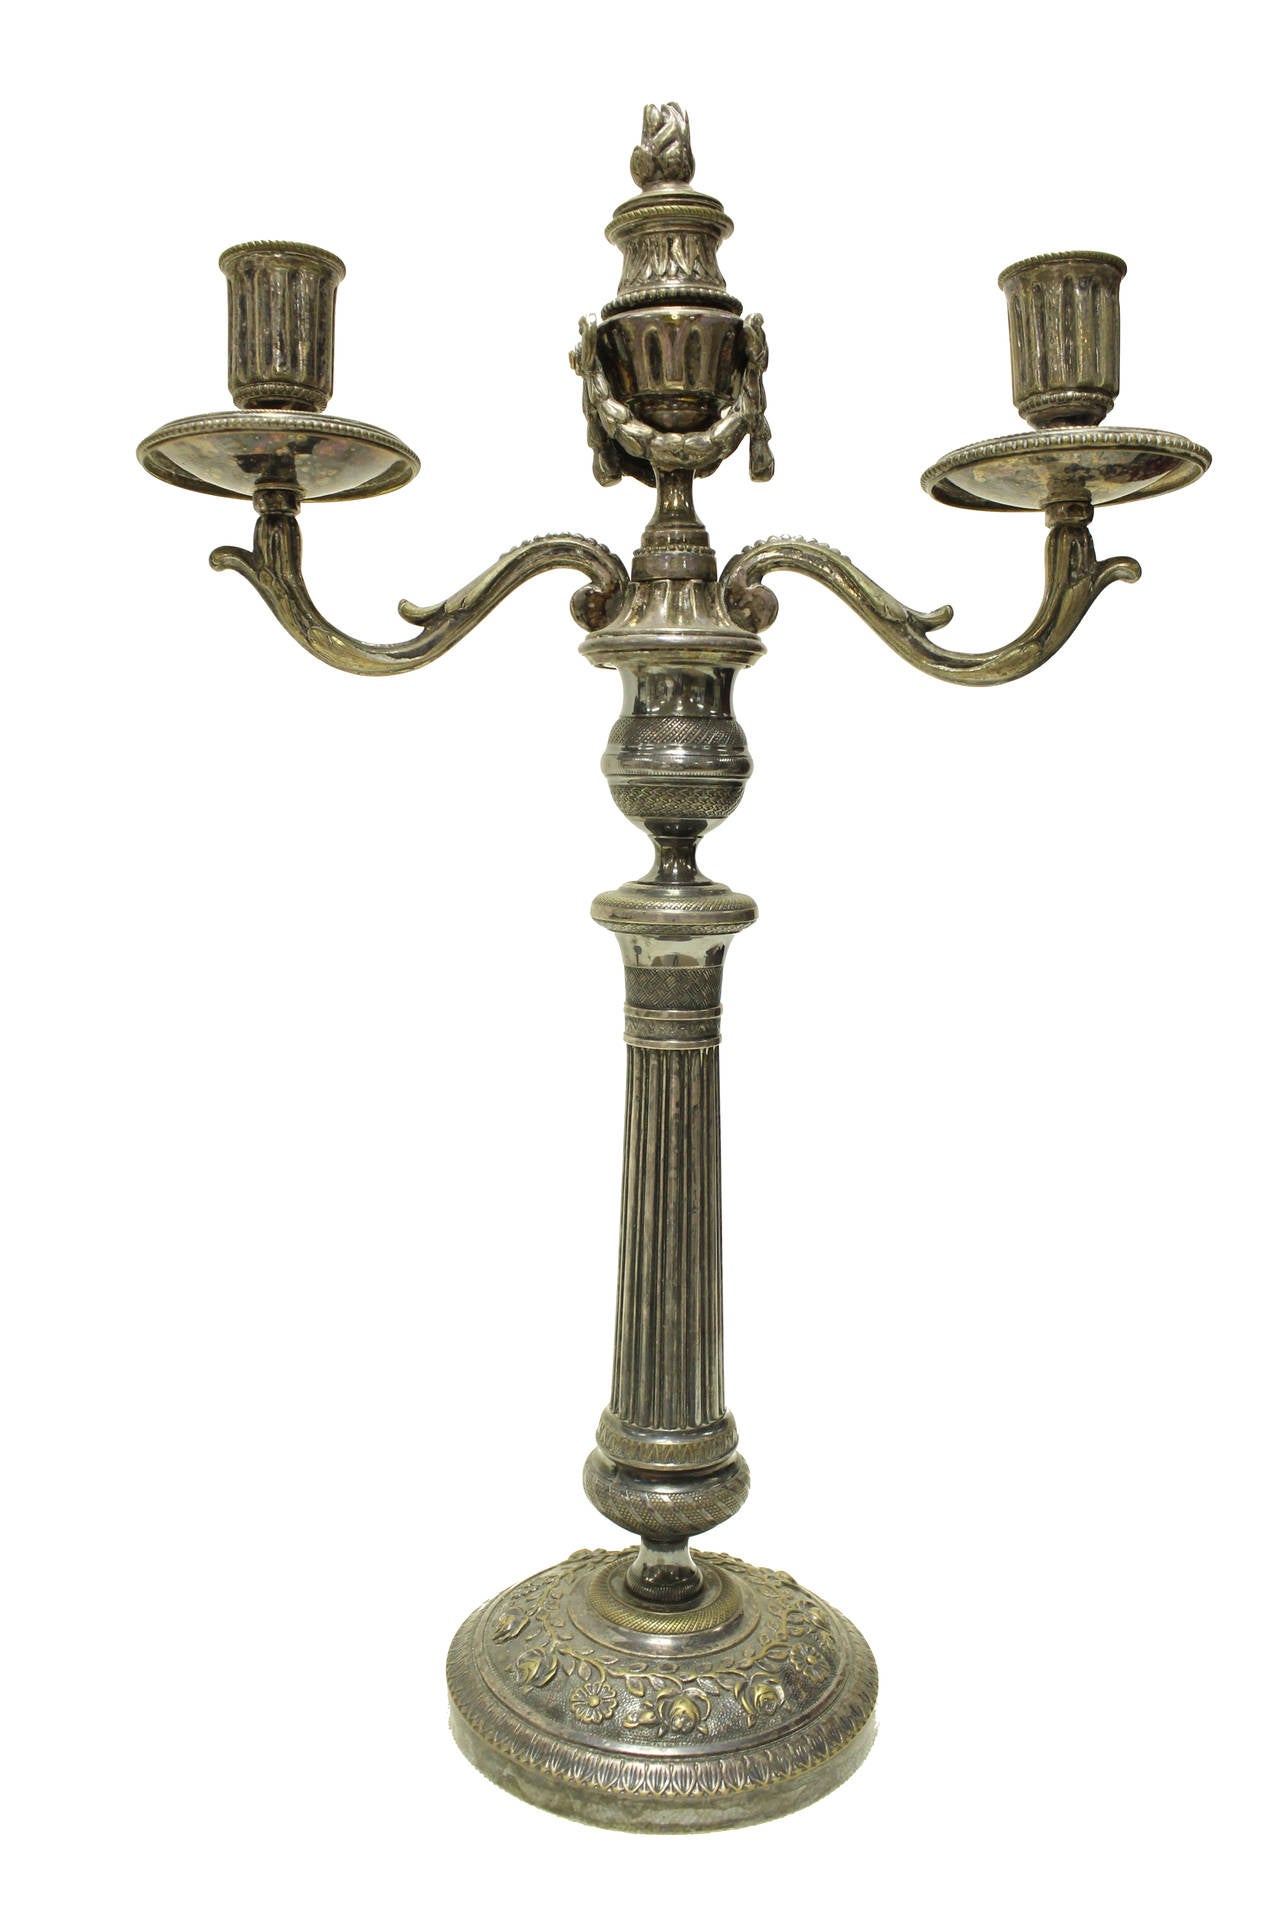 Silver Plate 19c FrenchLouis XVI Silver-Plated Pair of Candelabras